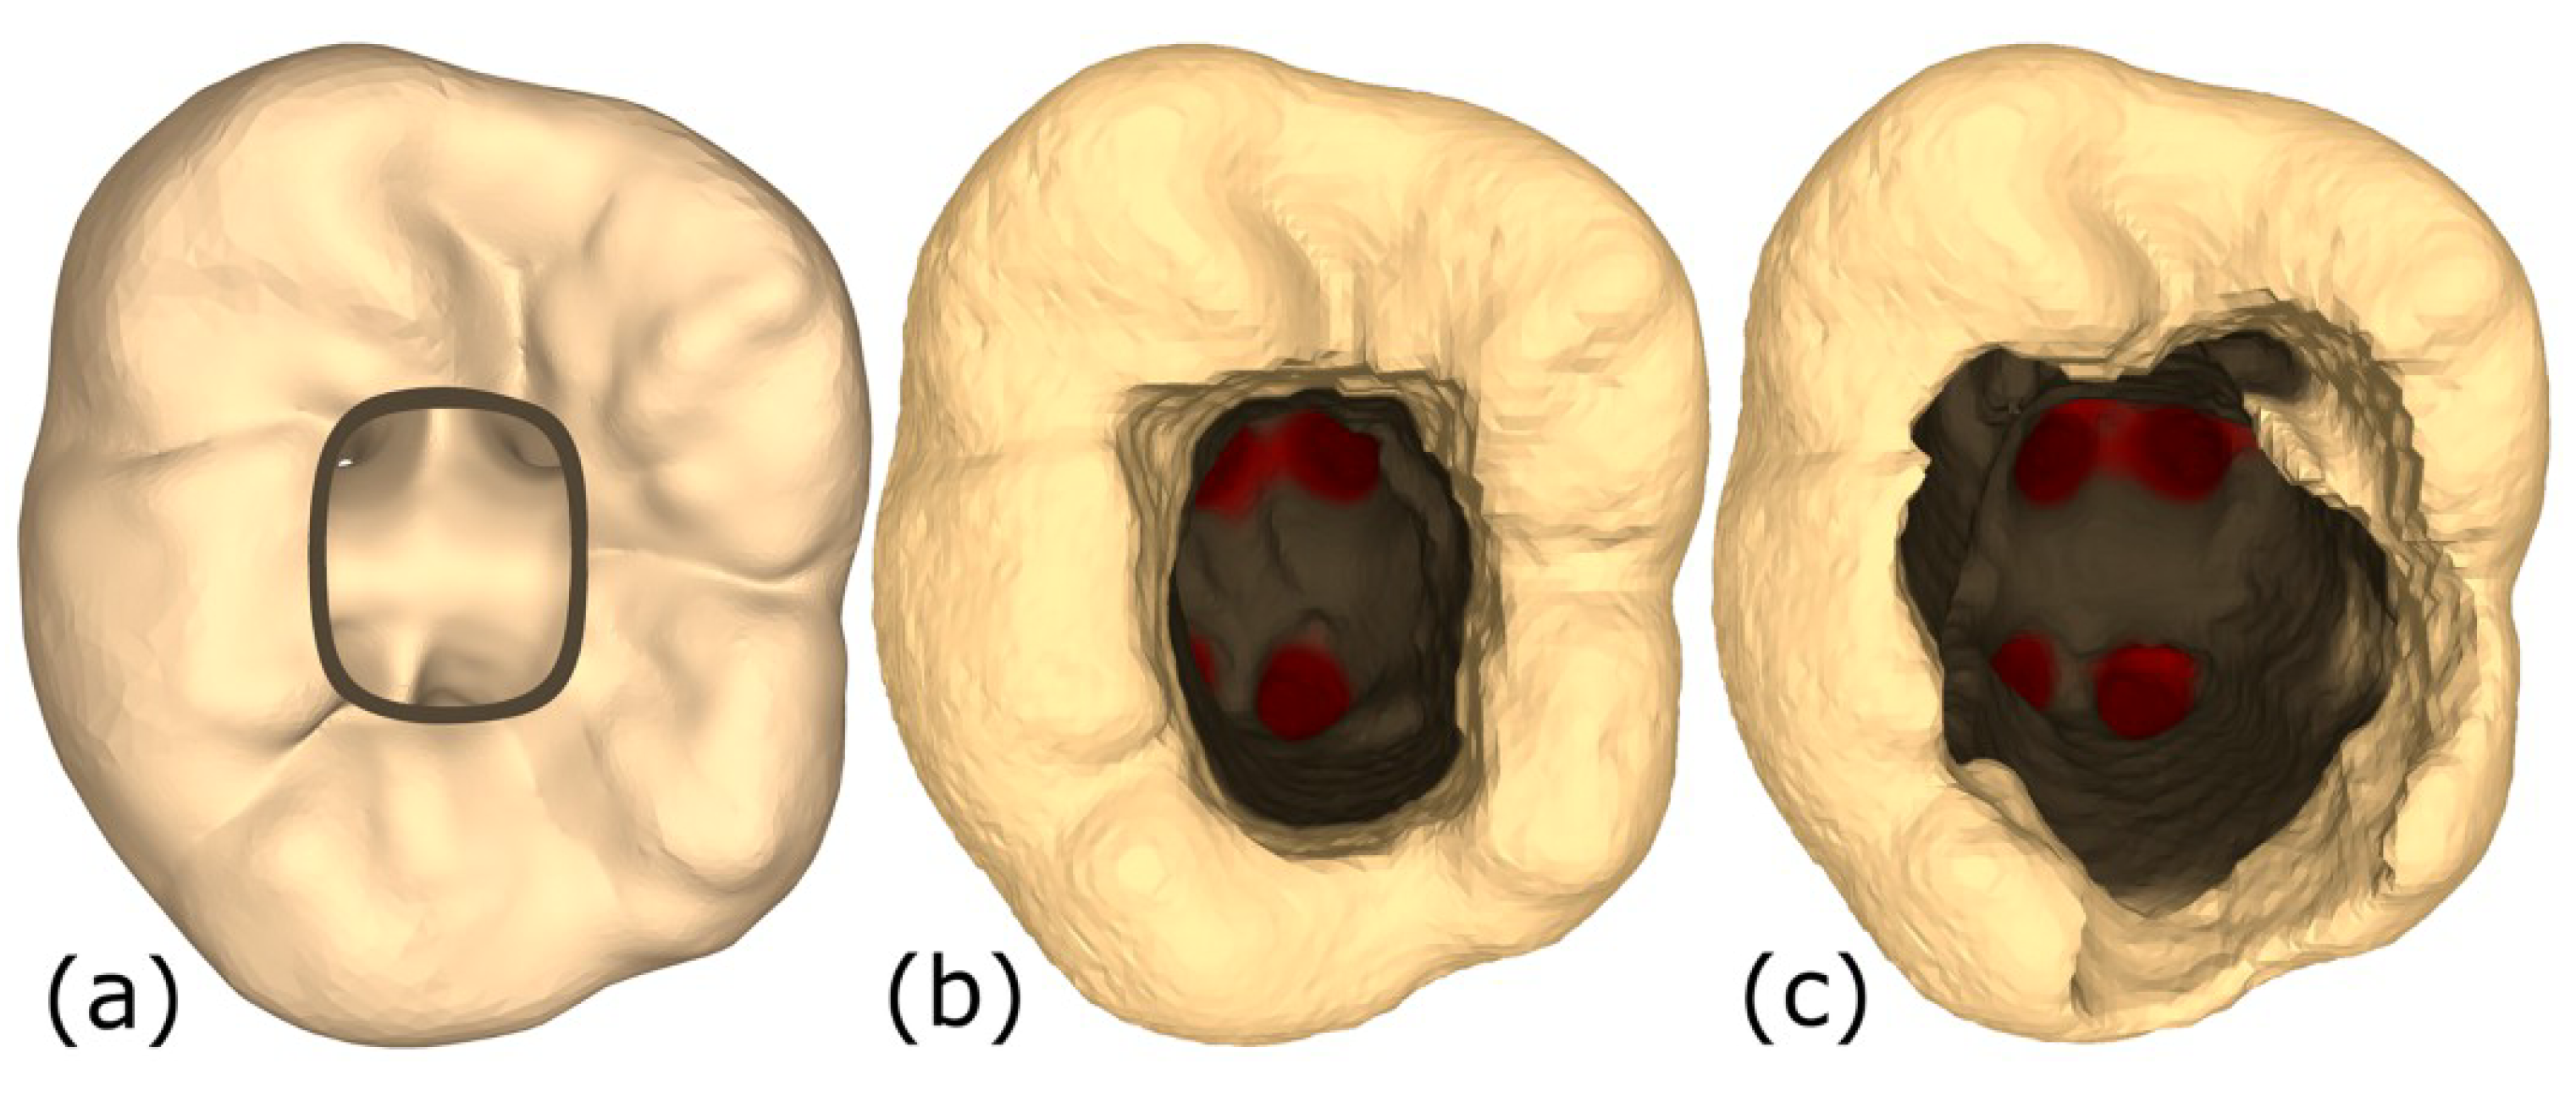 Comparison between three teeth states that could be the outcomes of drilling during root-canal-access opening.